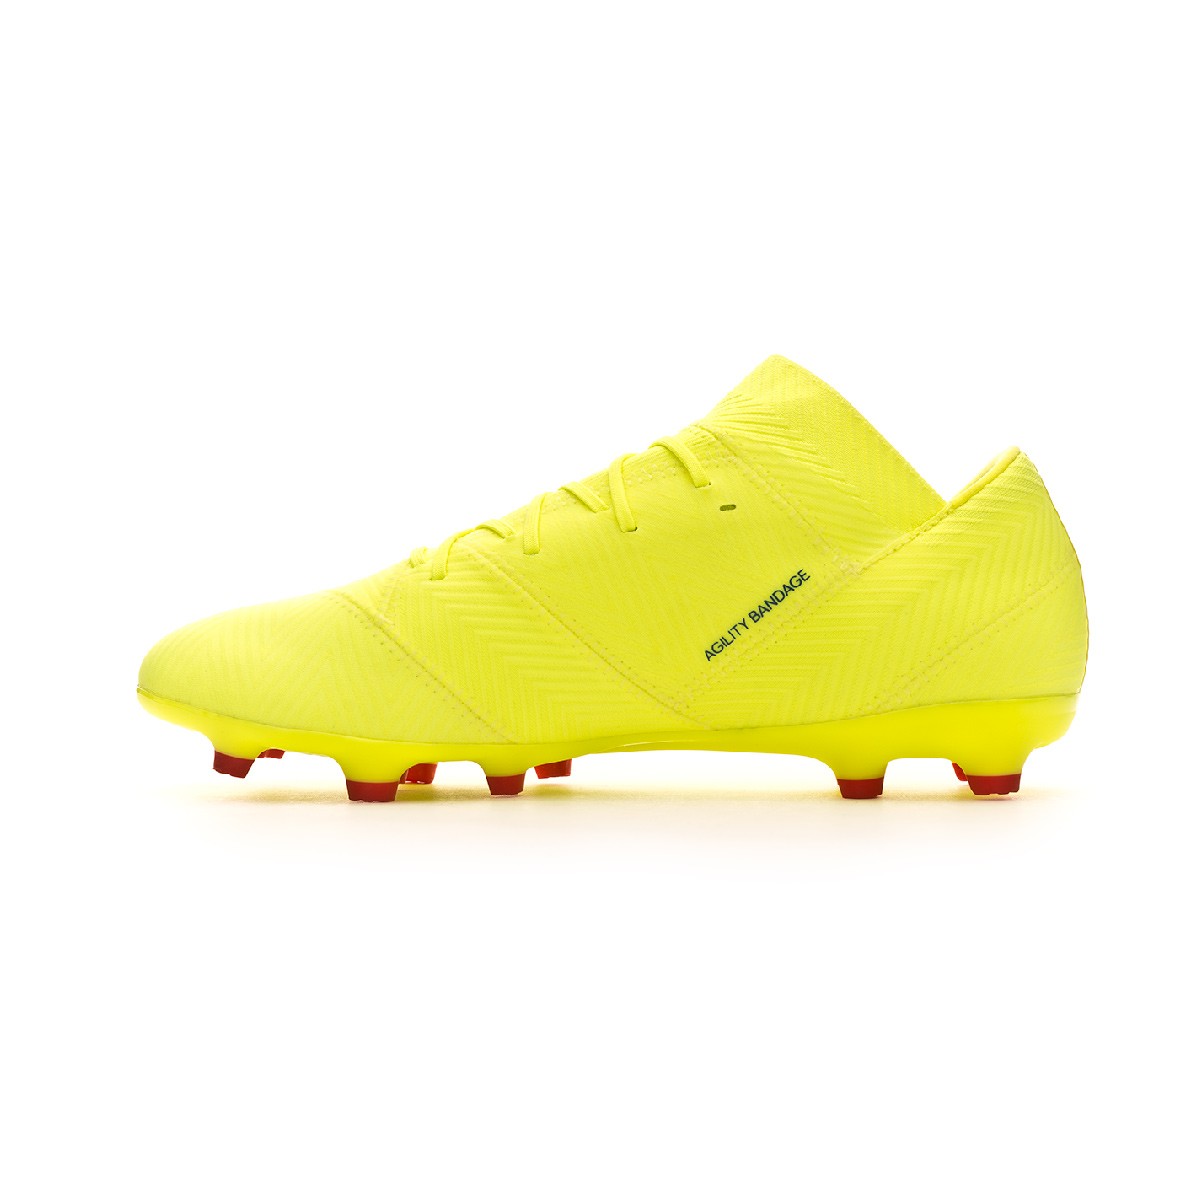 blue and yellow football boots